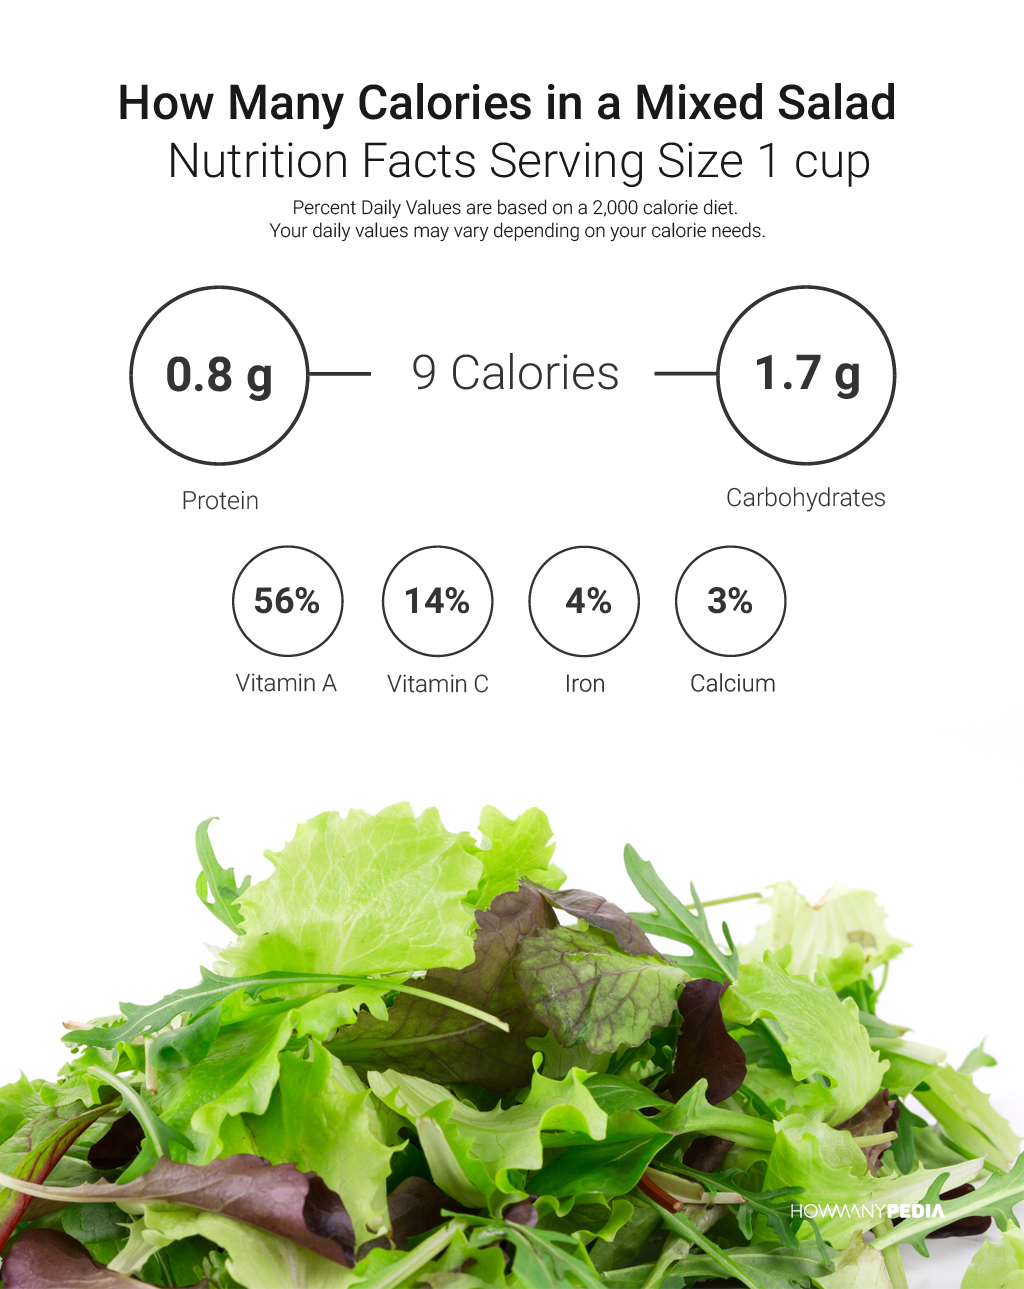 How Many Calories in a Salad Nutrition Facts